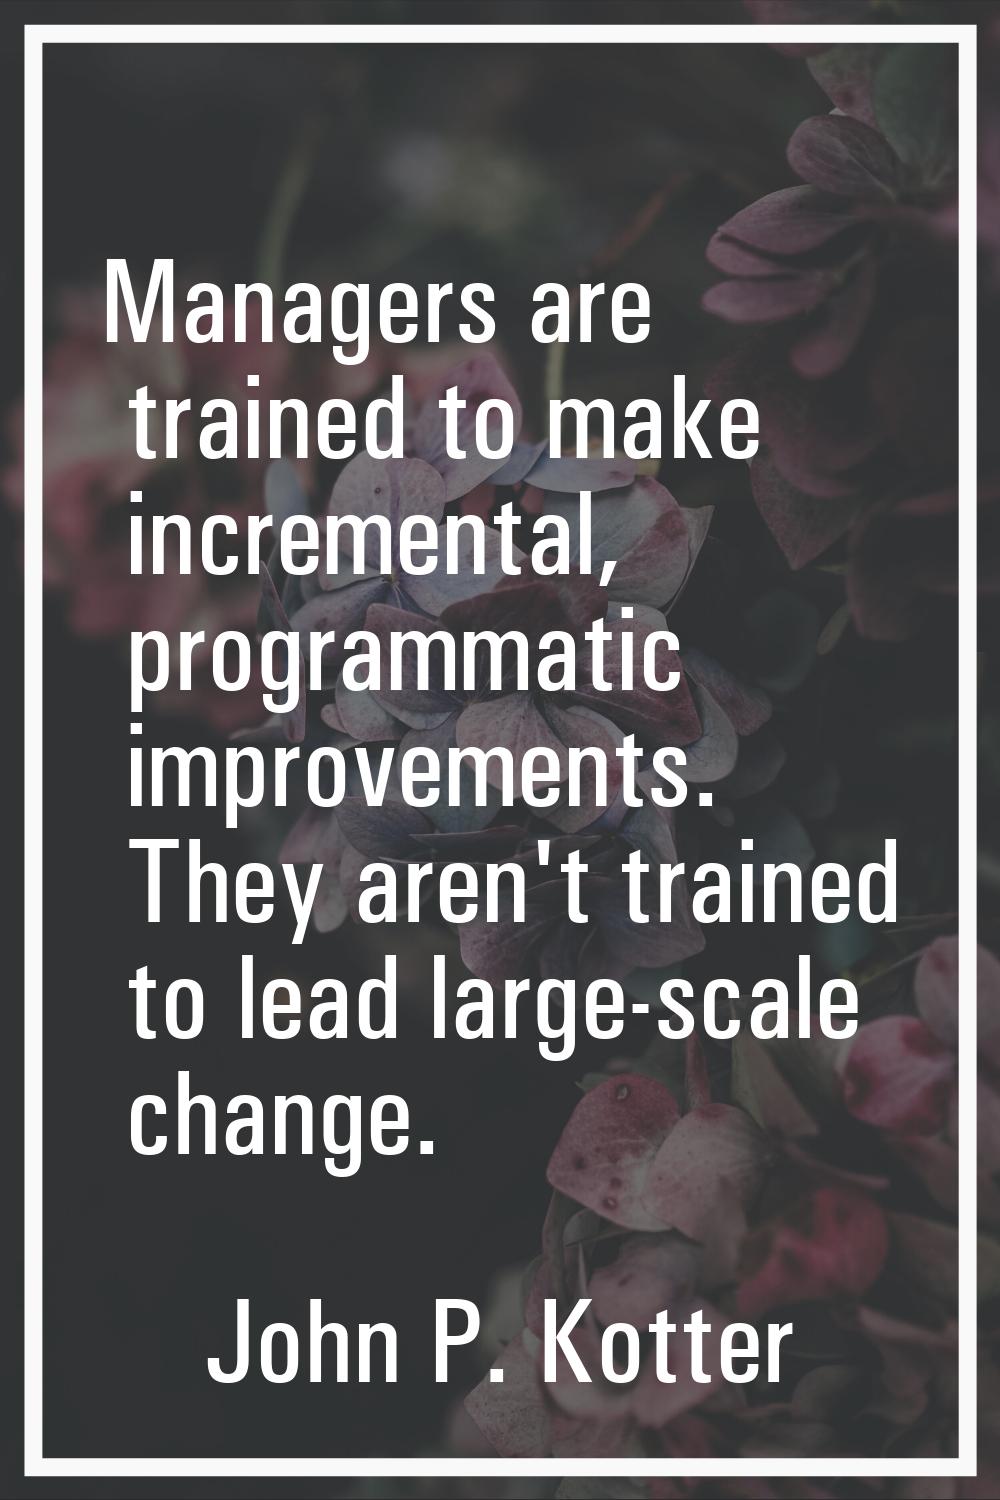 Managers are trained to make incremental, programmatic improvements. They aren't trained to lead la